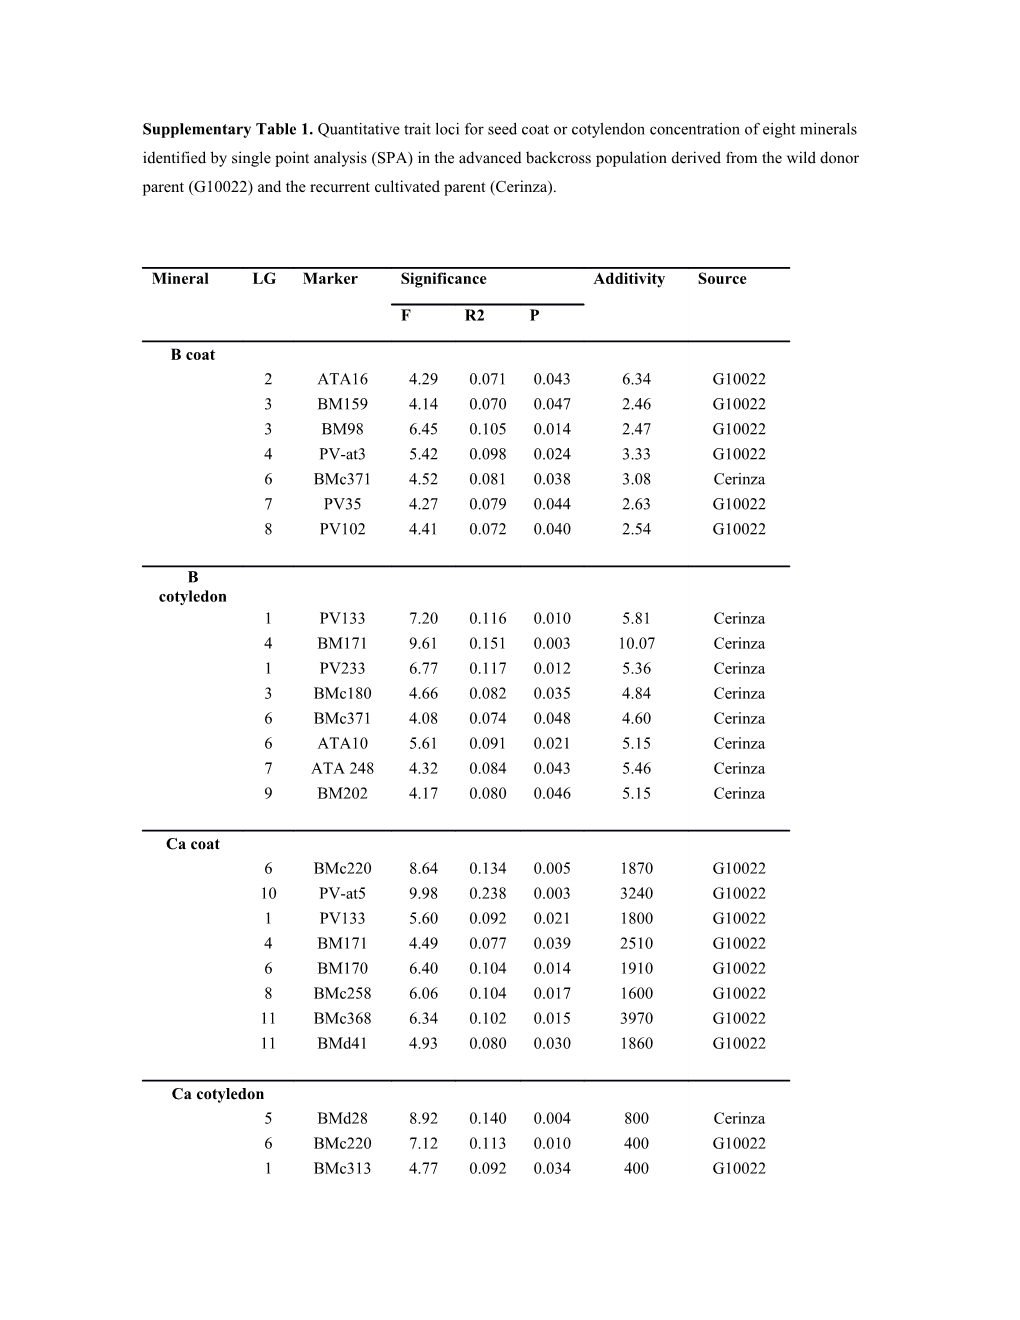 Supplementary Table 1. Quantitative Trait Loci for Seed Coat Or Cotylendonconcentration